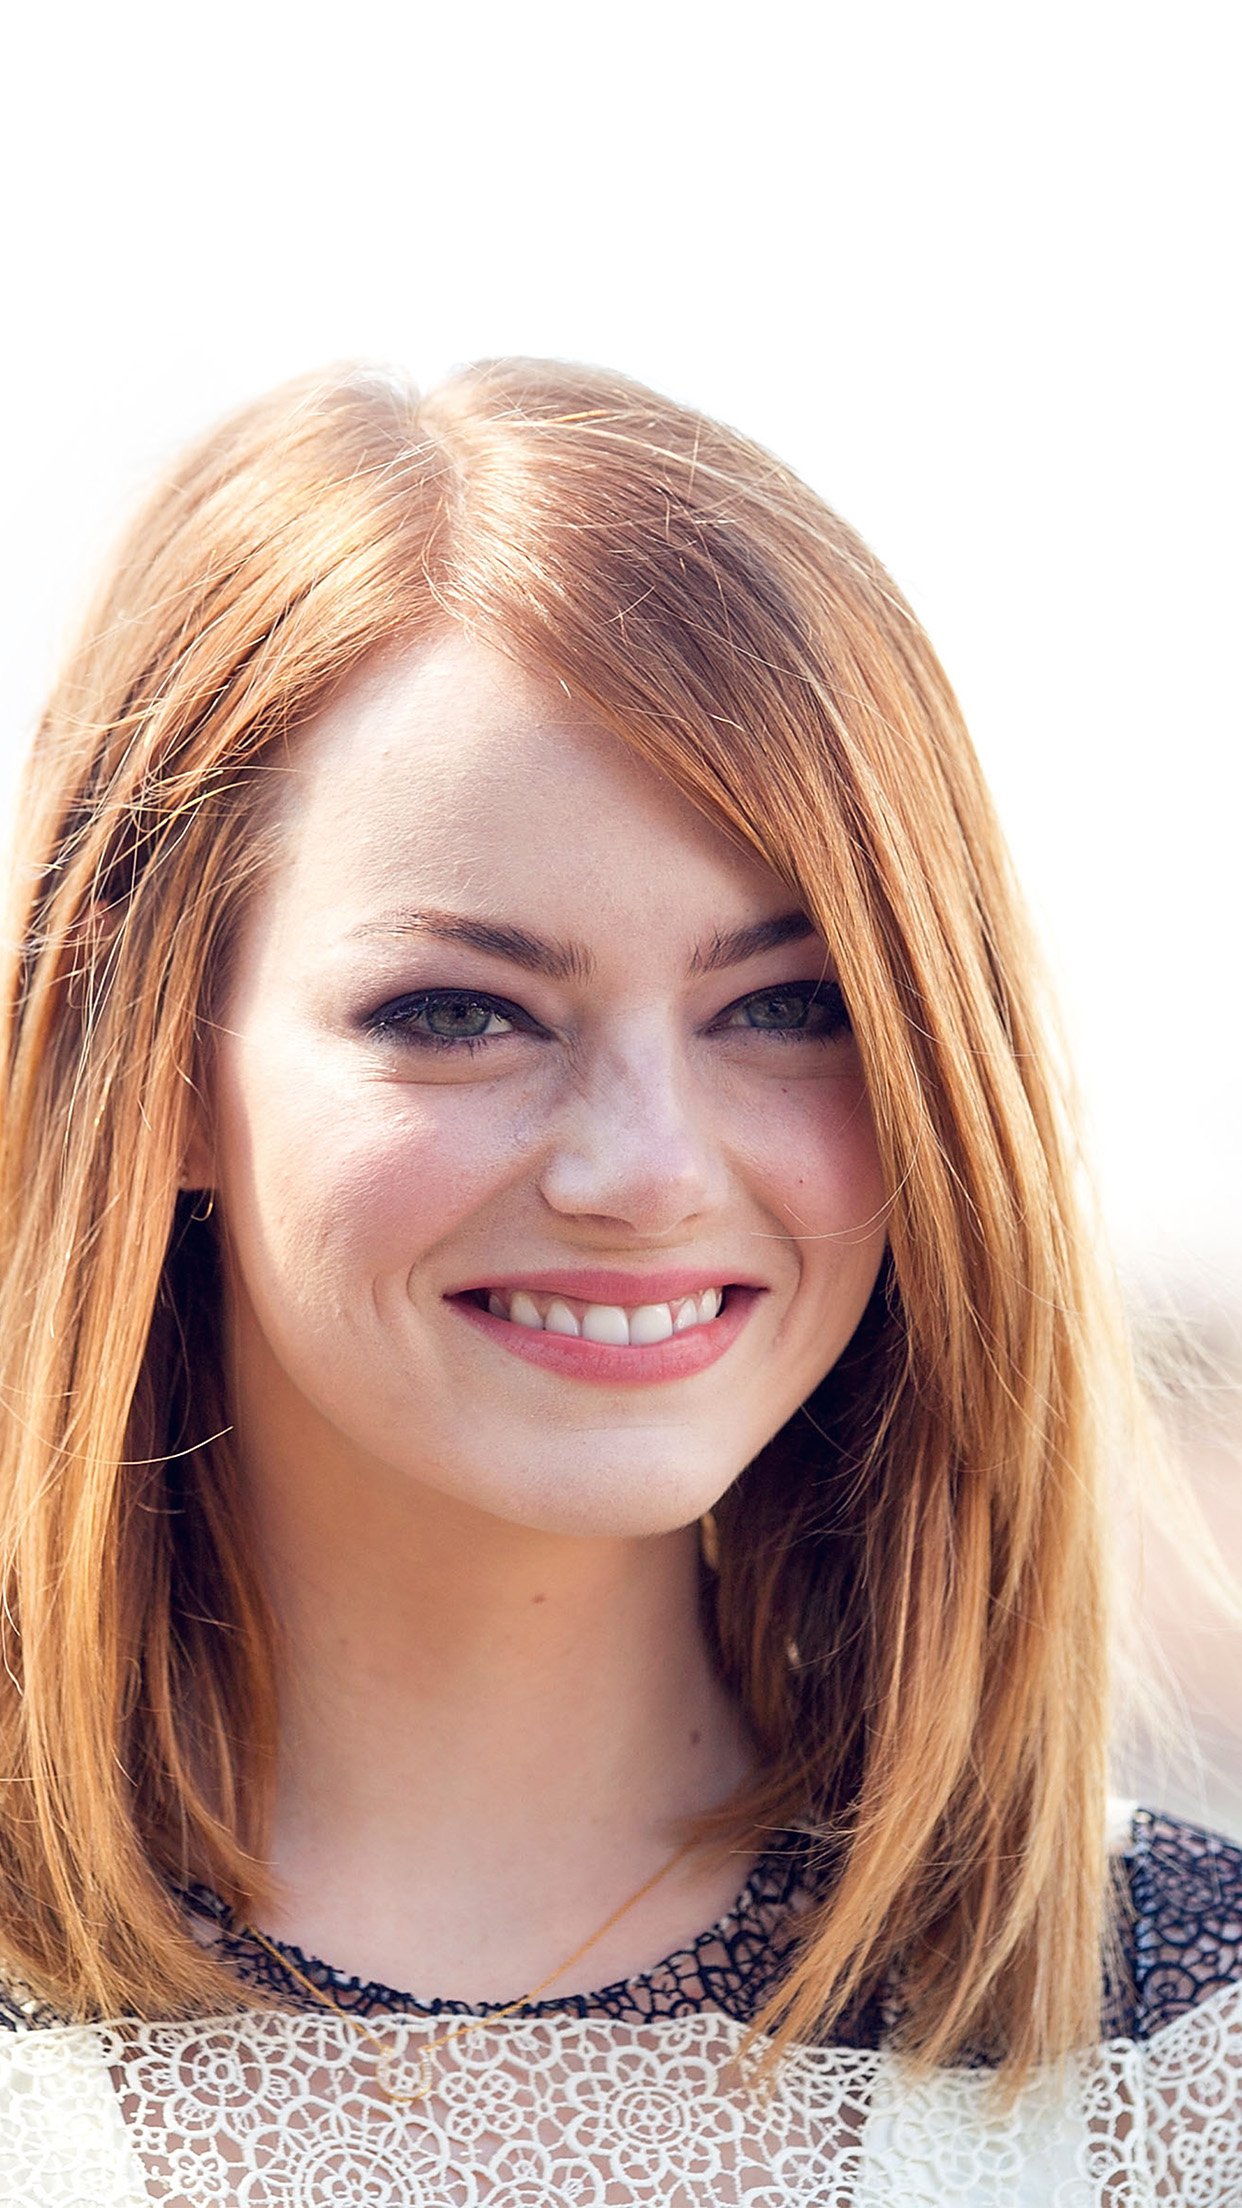 Emma Stone Smile Celebrity Film Android Wallpaper - Short Hair For Teen Ager - HD Wallpaper 